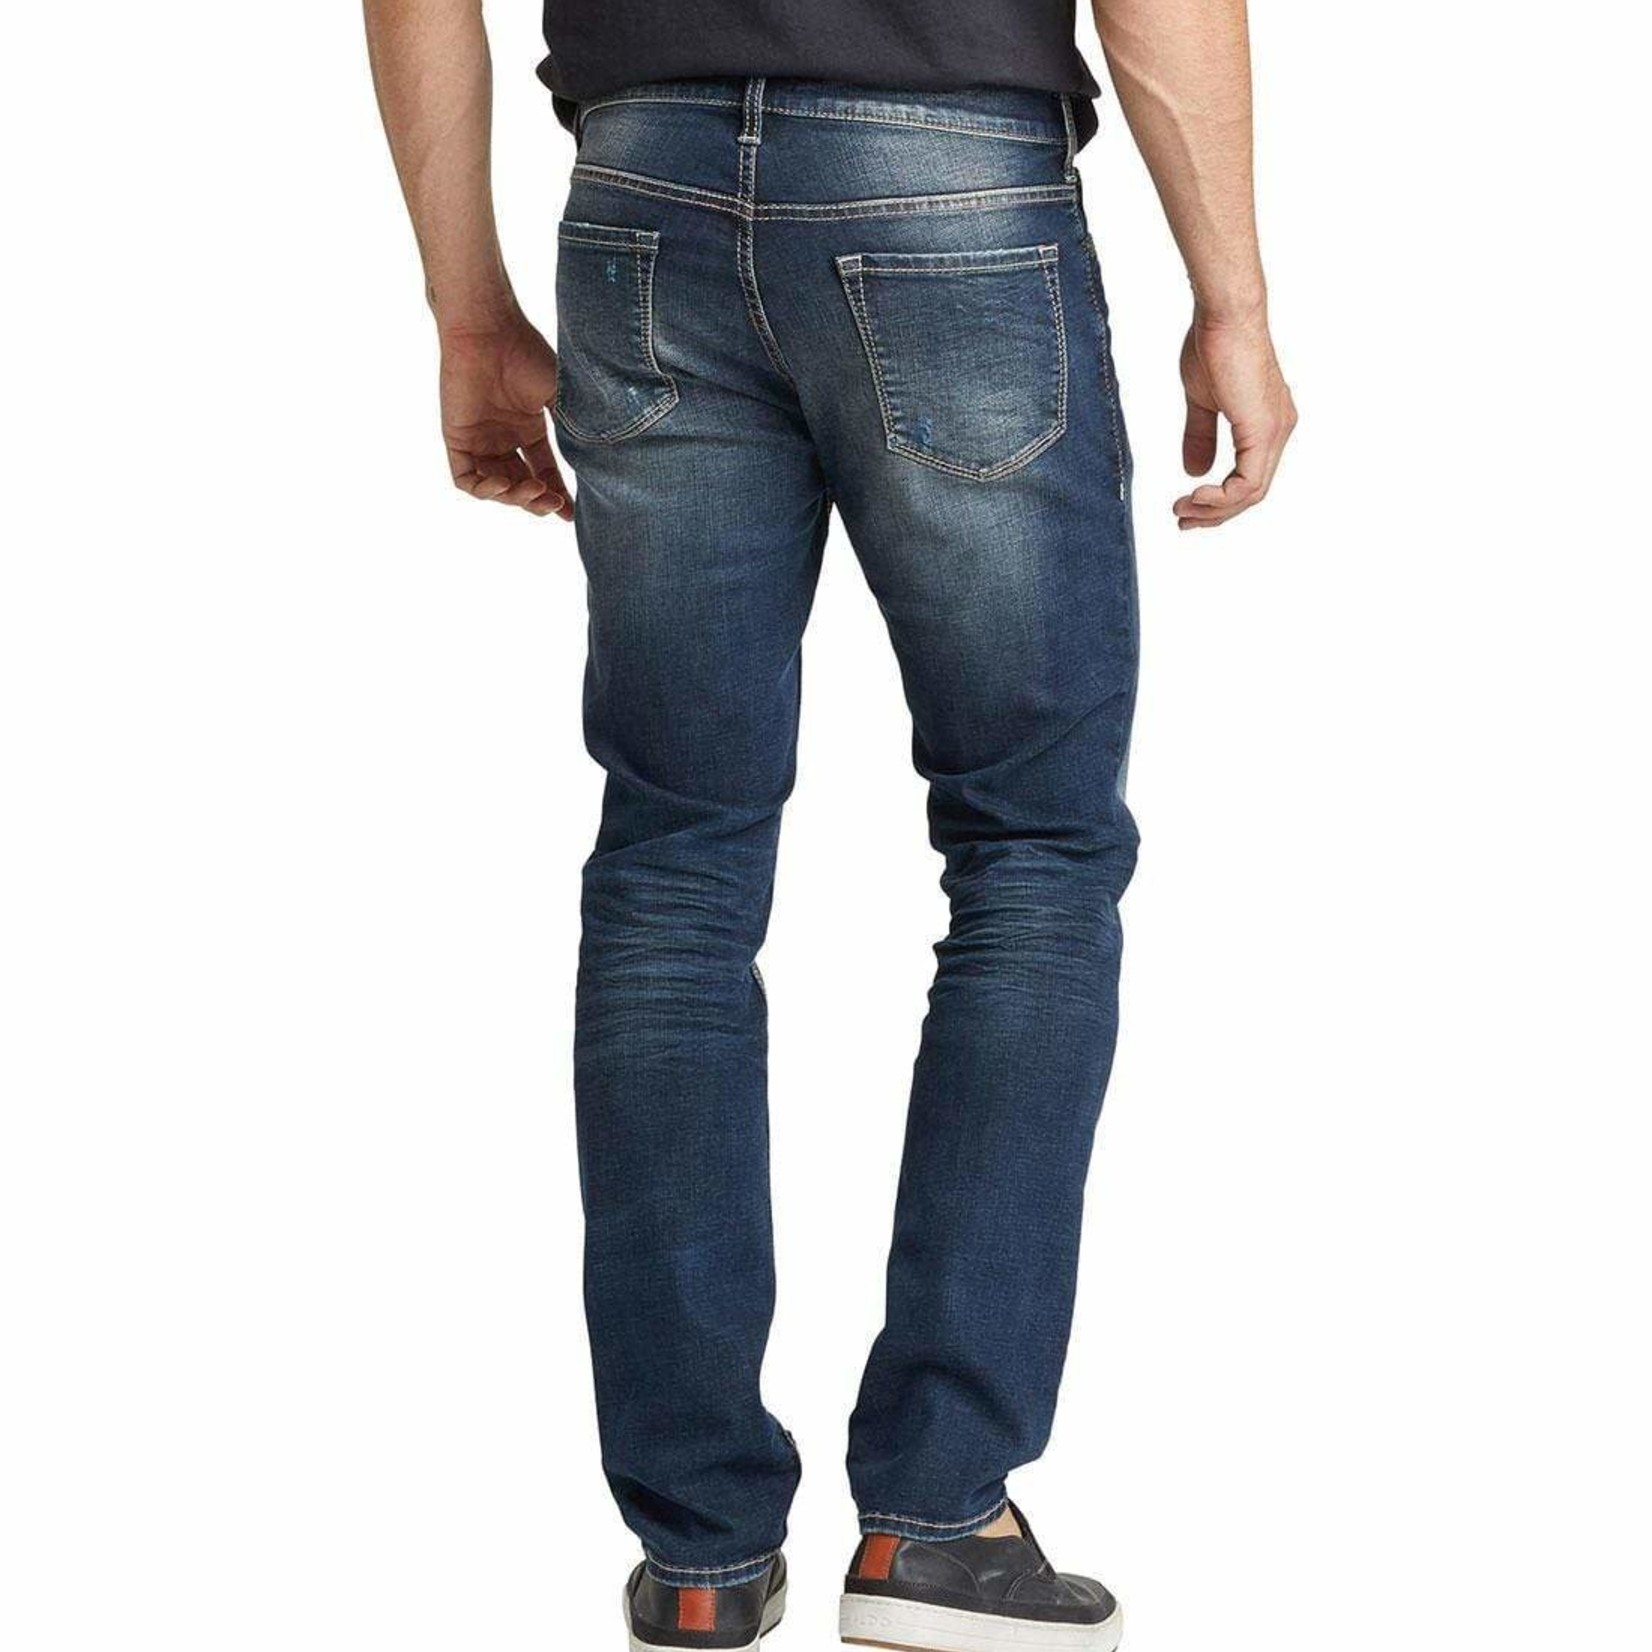 Silver Jeans The "Taavi RAS333" by Silber Jeans Canada